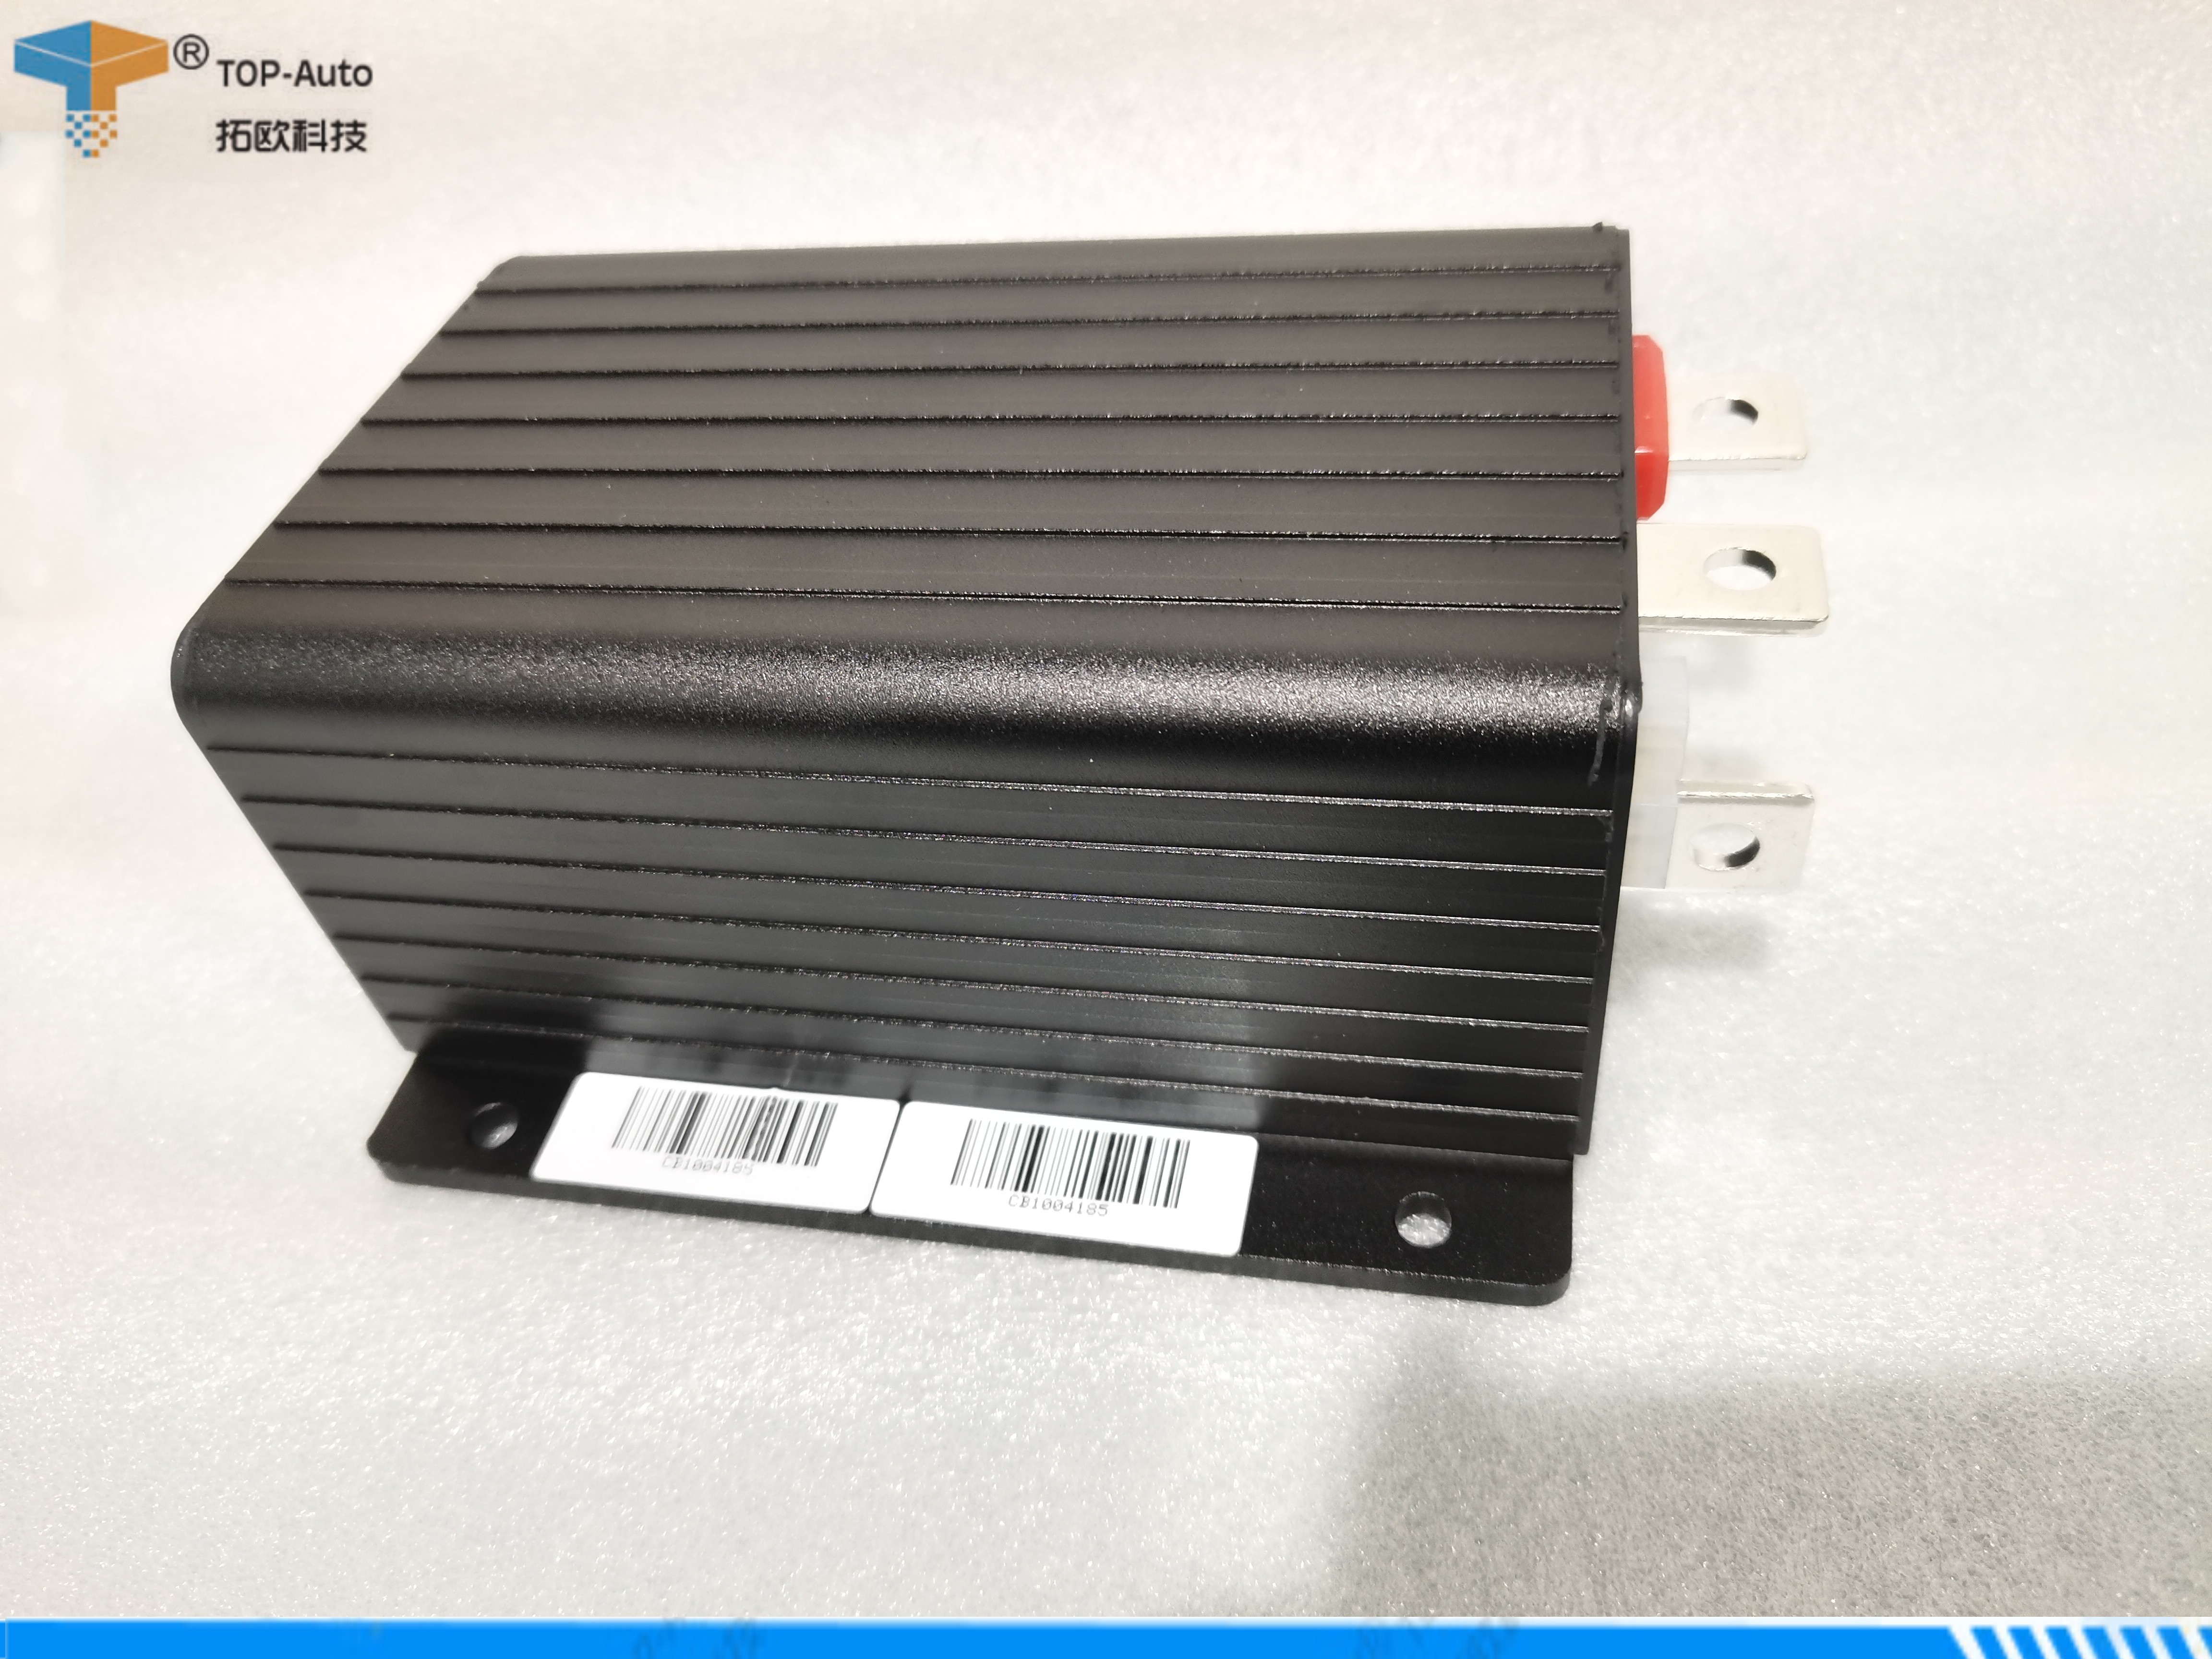  CB1004185 SANY Electric DC Motor Controller SYDC-S2430B Manufactures